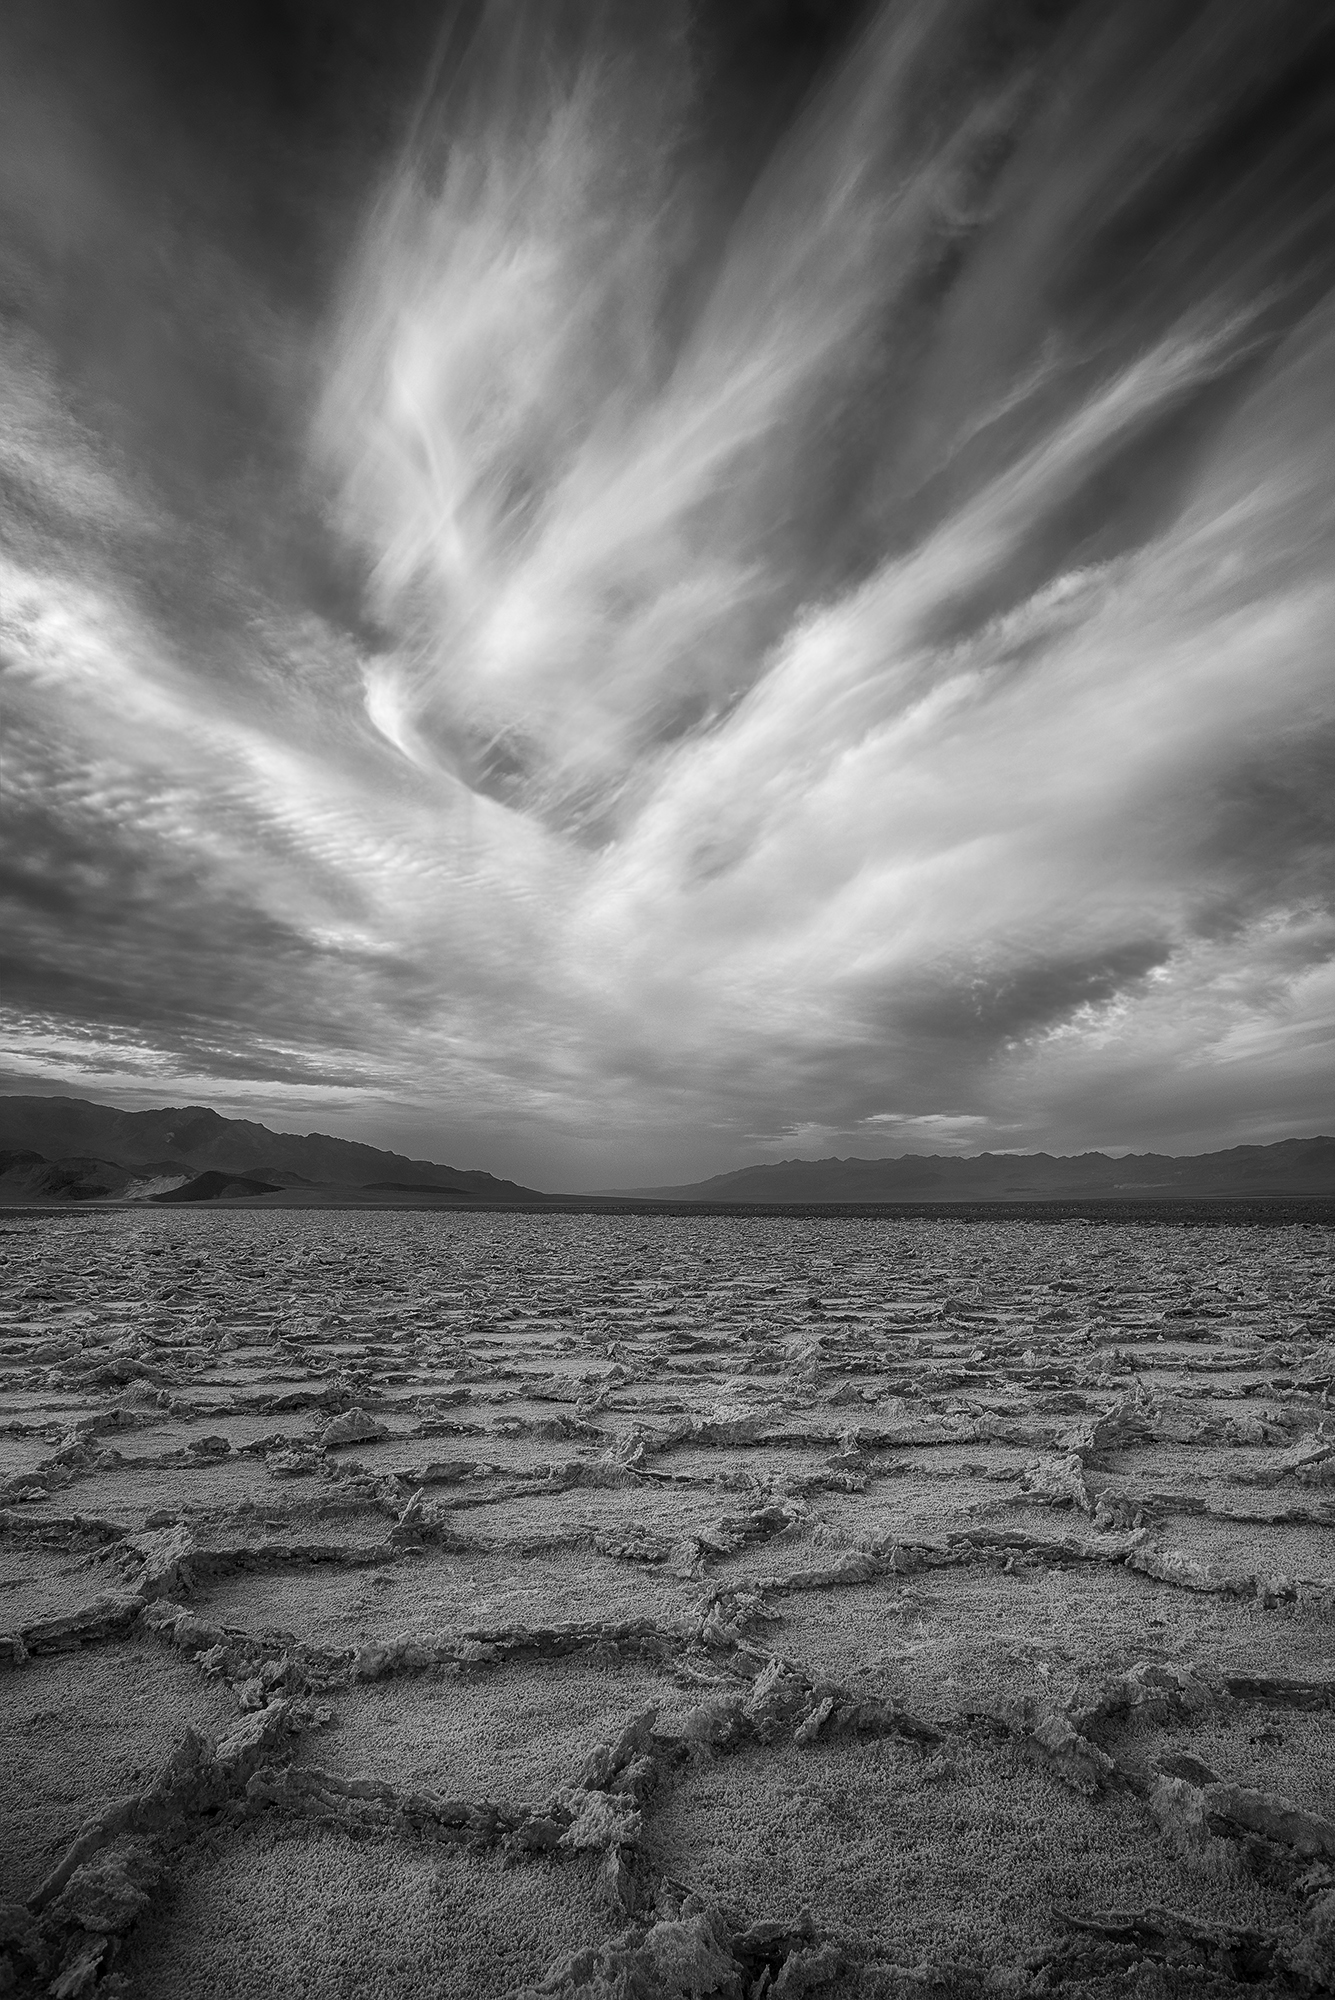 A black and white image showing a deserted desert and a cloudy sky. The ground is covered in cracks, and the horizon seems to stretch on forever.